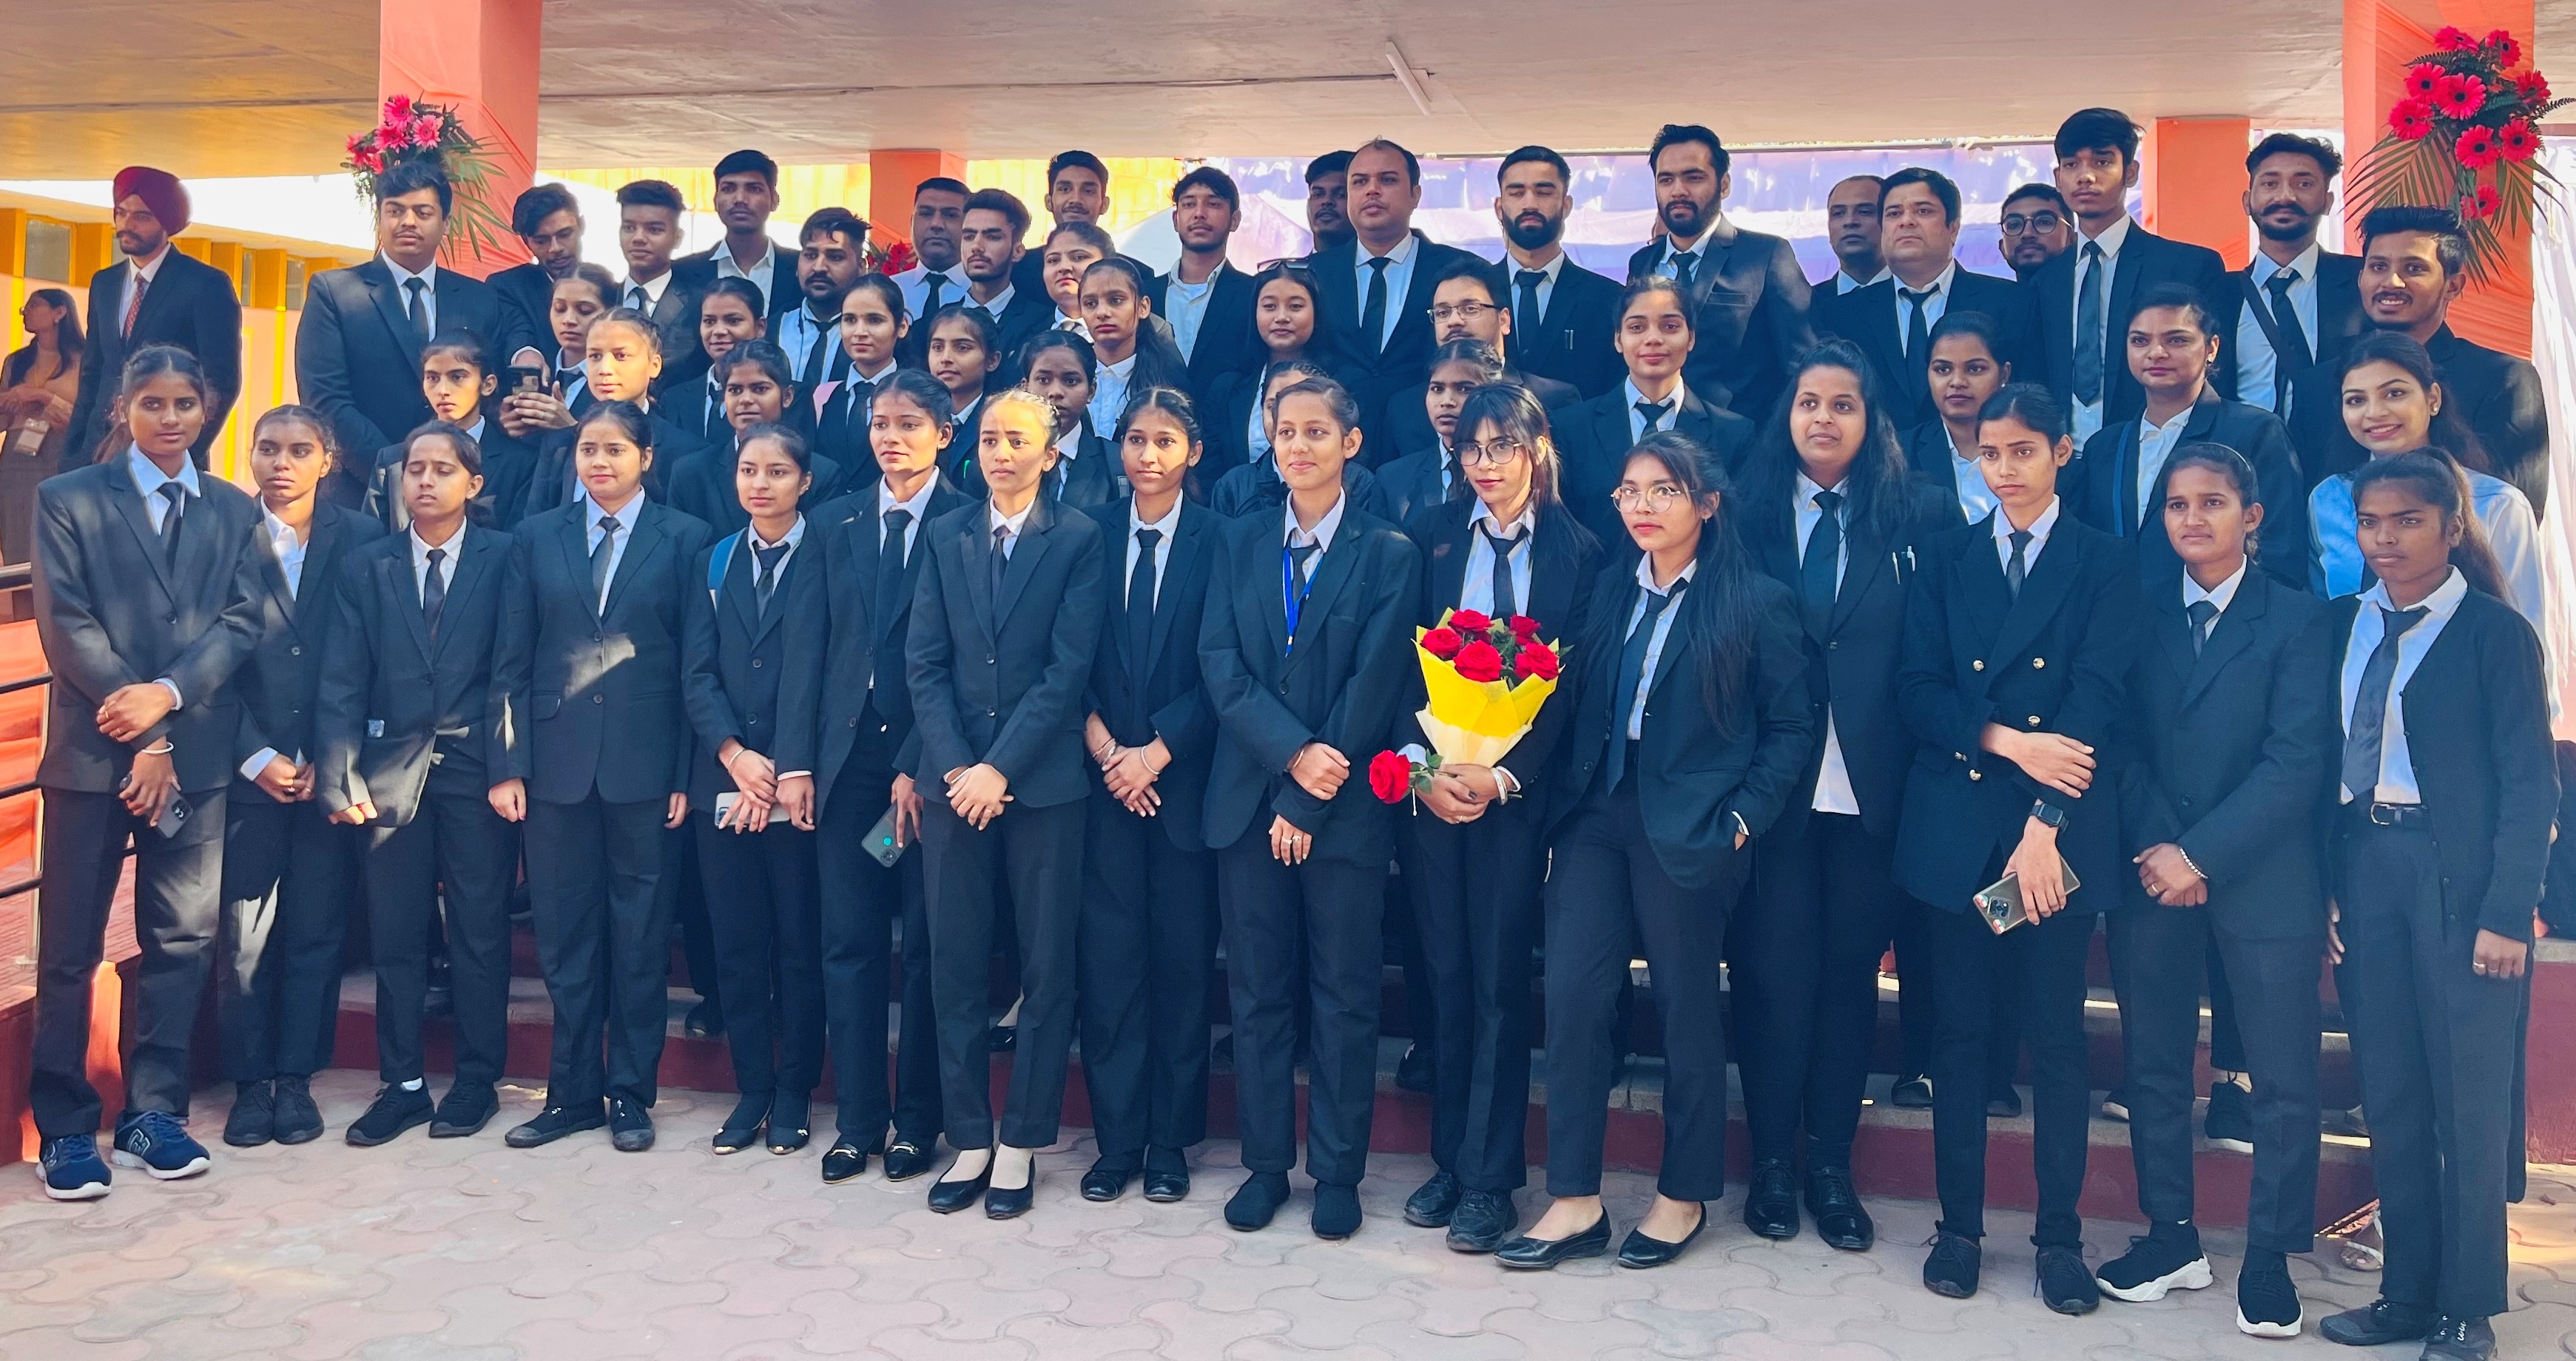 Aryans Law Students participated in legal seminar organised by Bar Council of India